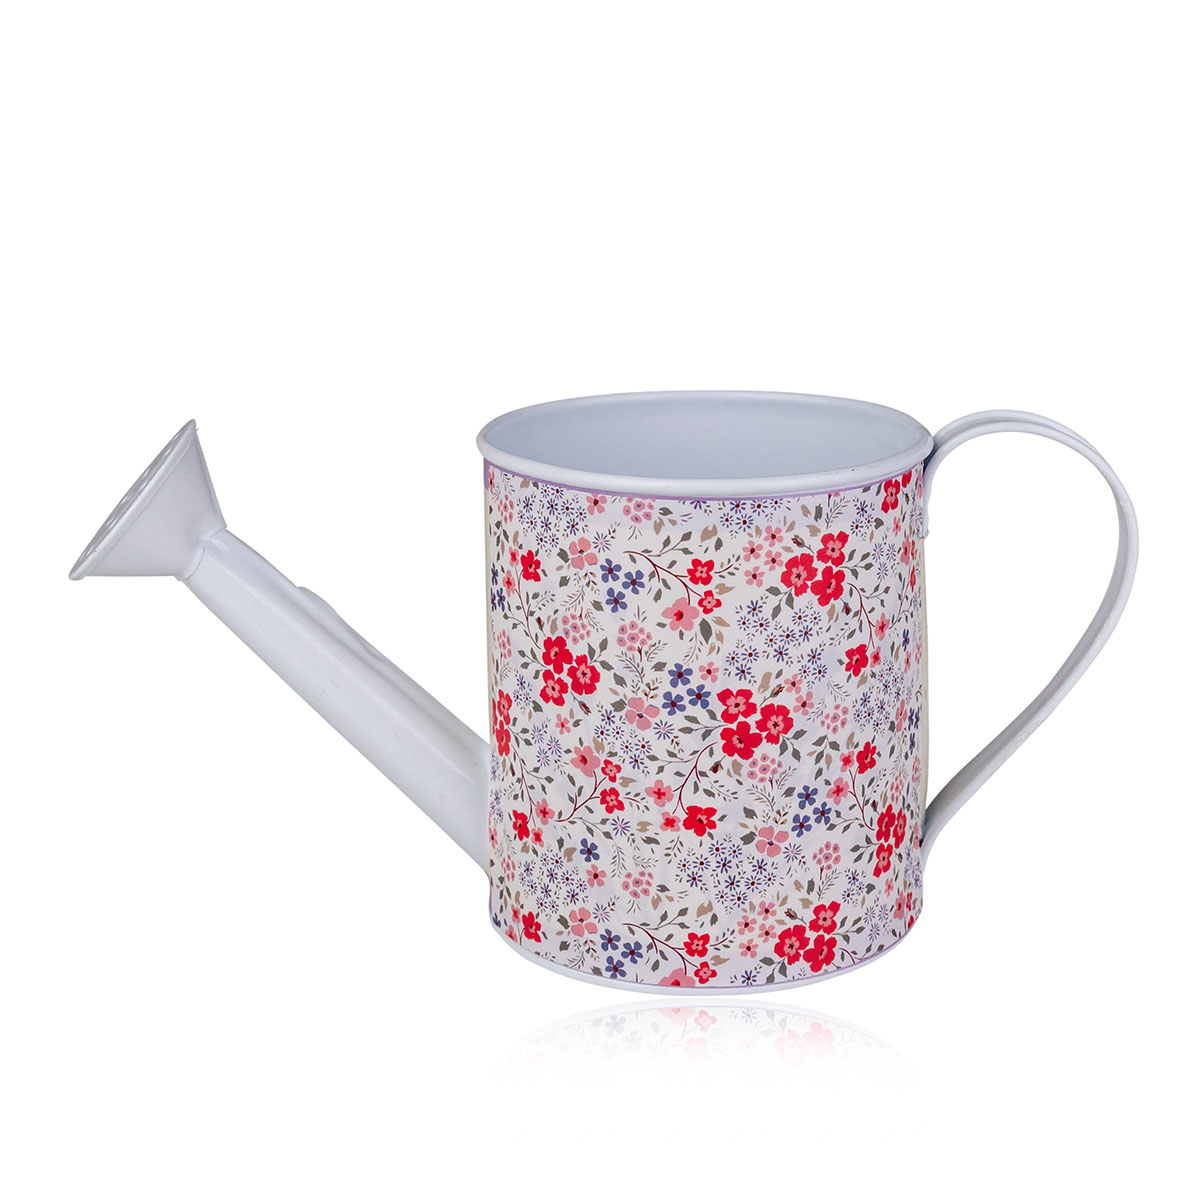 Blossom watering can gift set